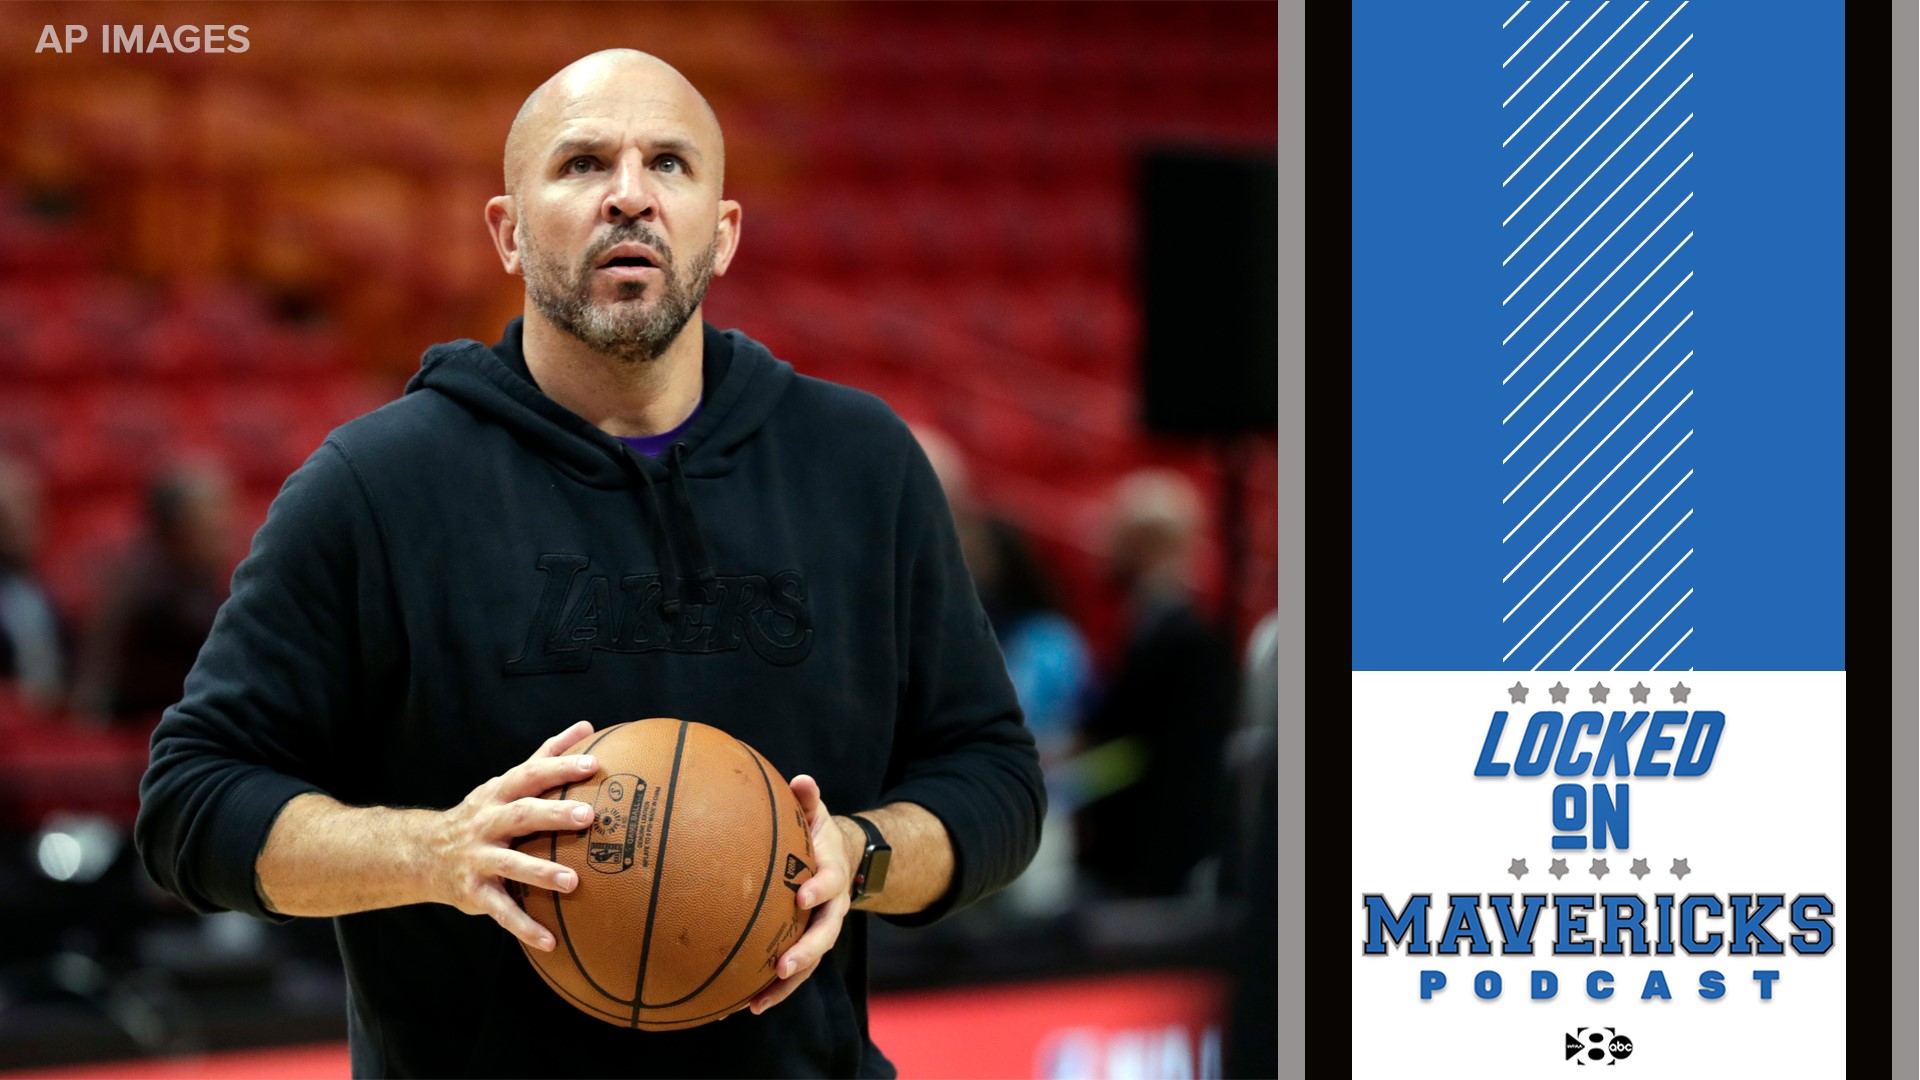 Nick Angstadt (@NickVanExit) and Isaac Harris (@IsaacLHarris) discuss the official announcements from the Dallas Mavericks regarding Nico Harrison and Jason Kidd.